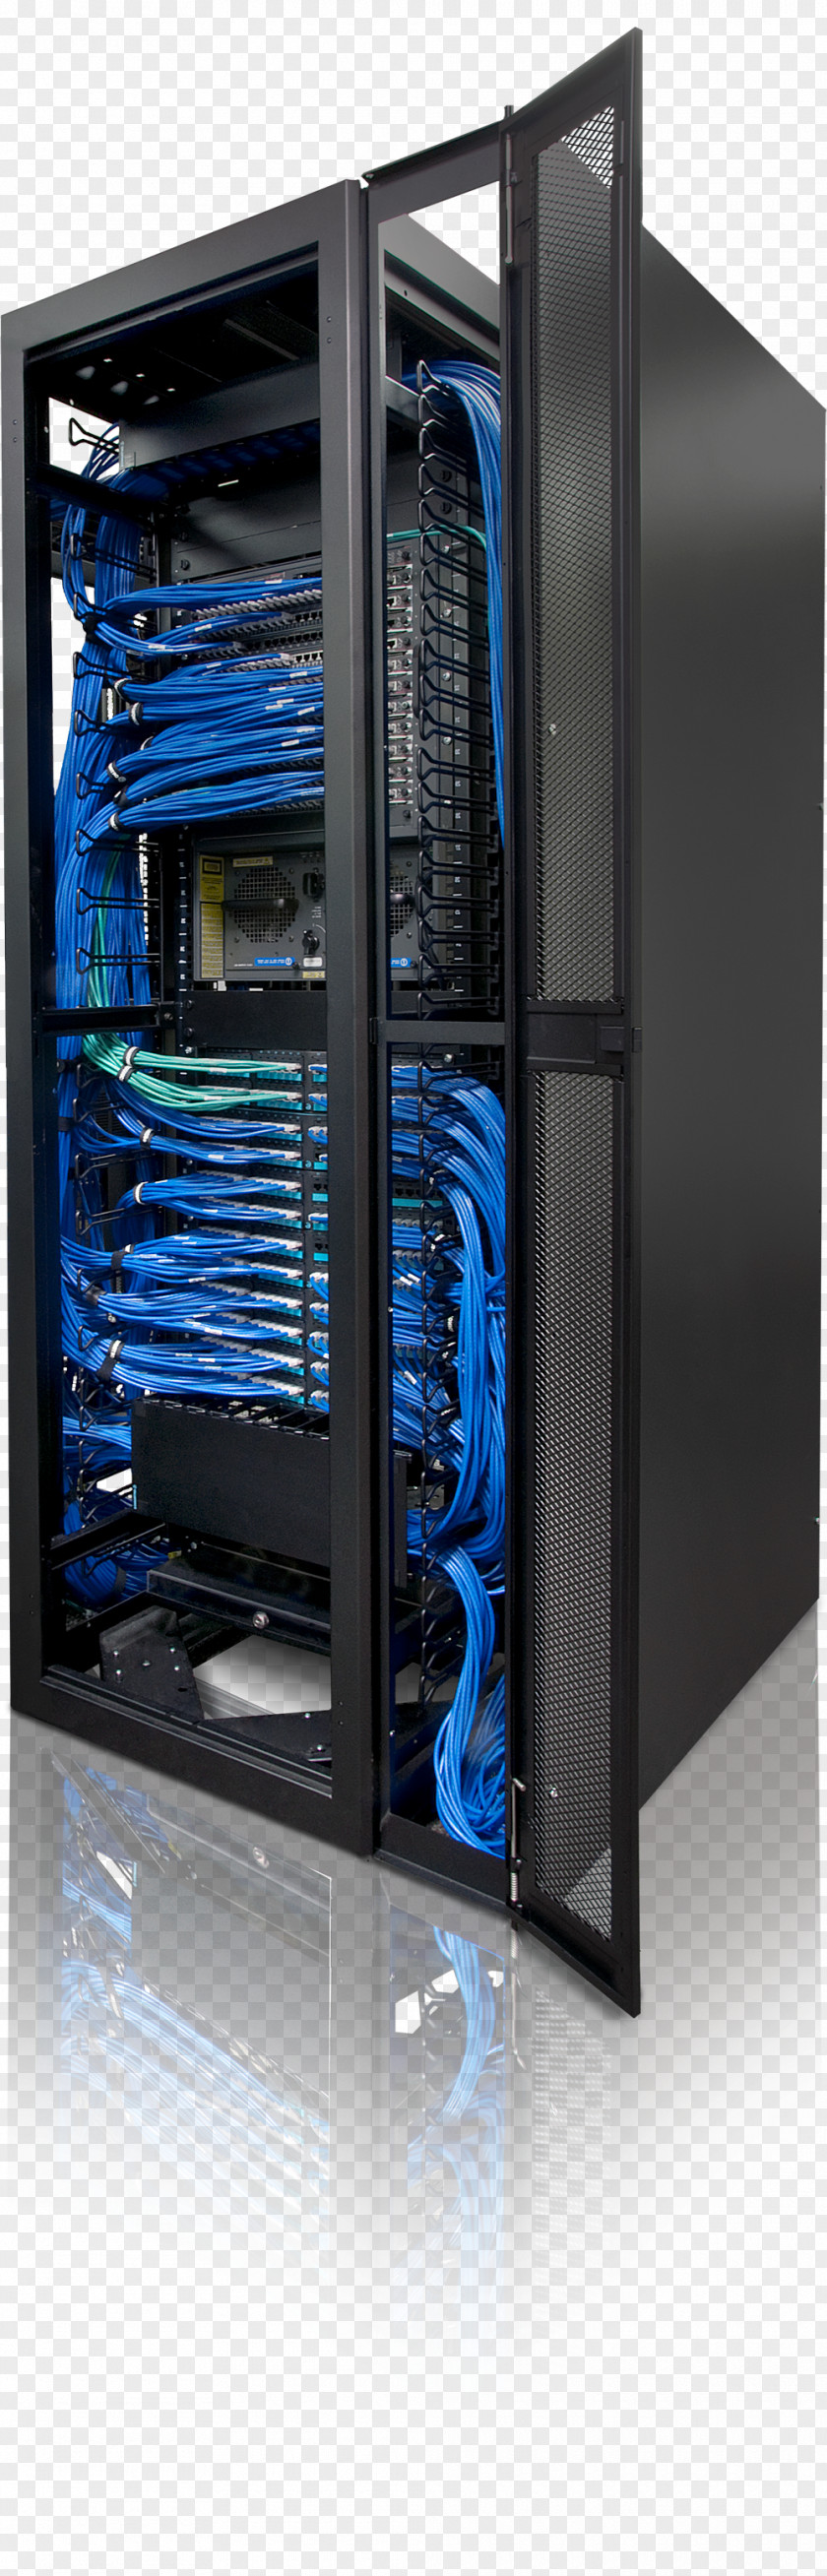 Electrol Computer Cases & Housings Electrical Enclosure Hardware Servers 19-inch Rack PNG